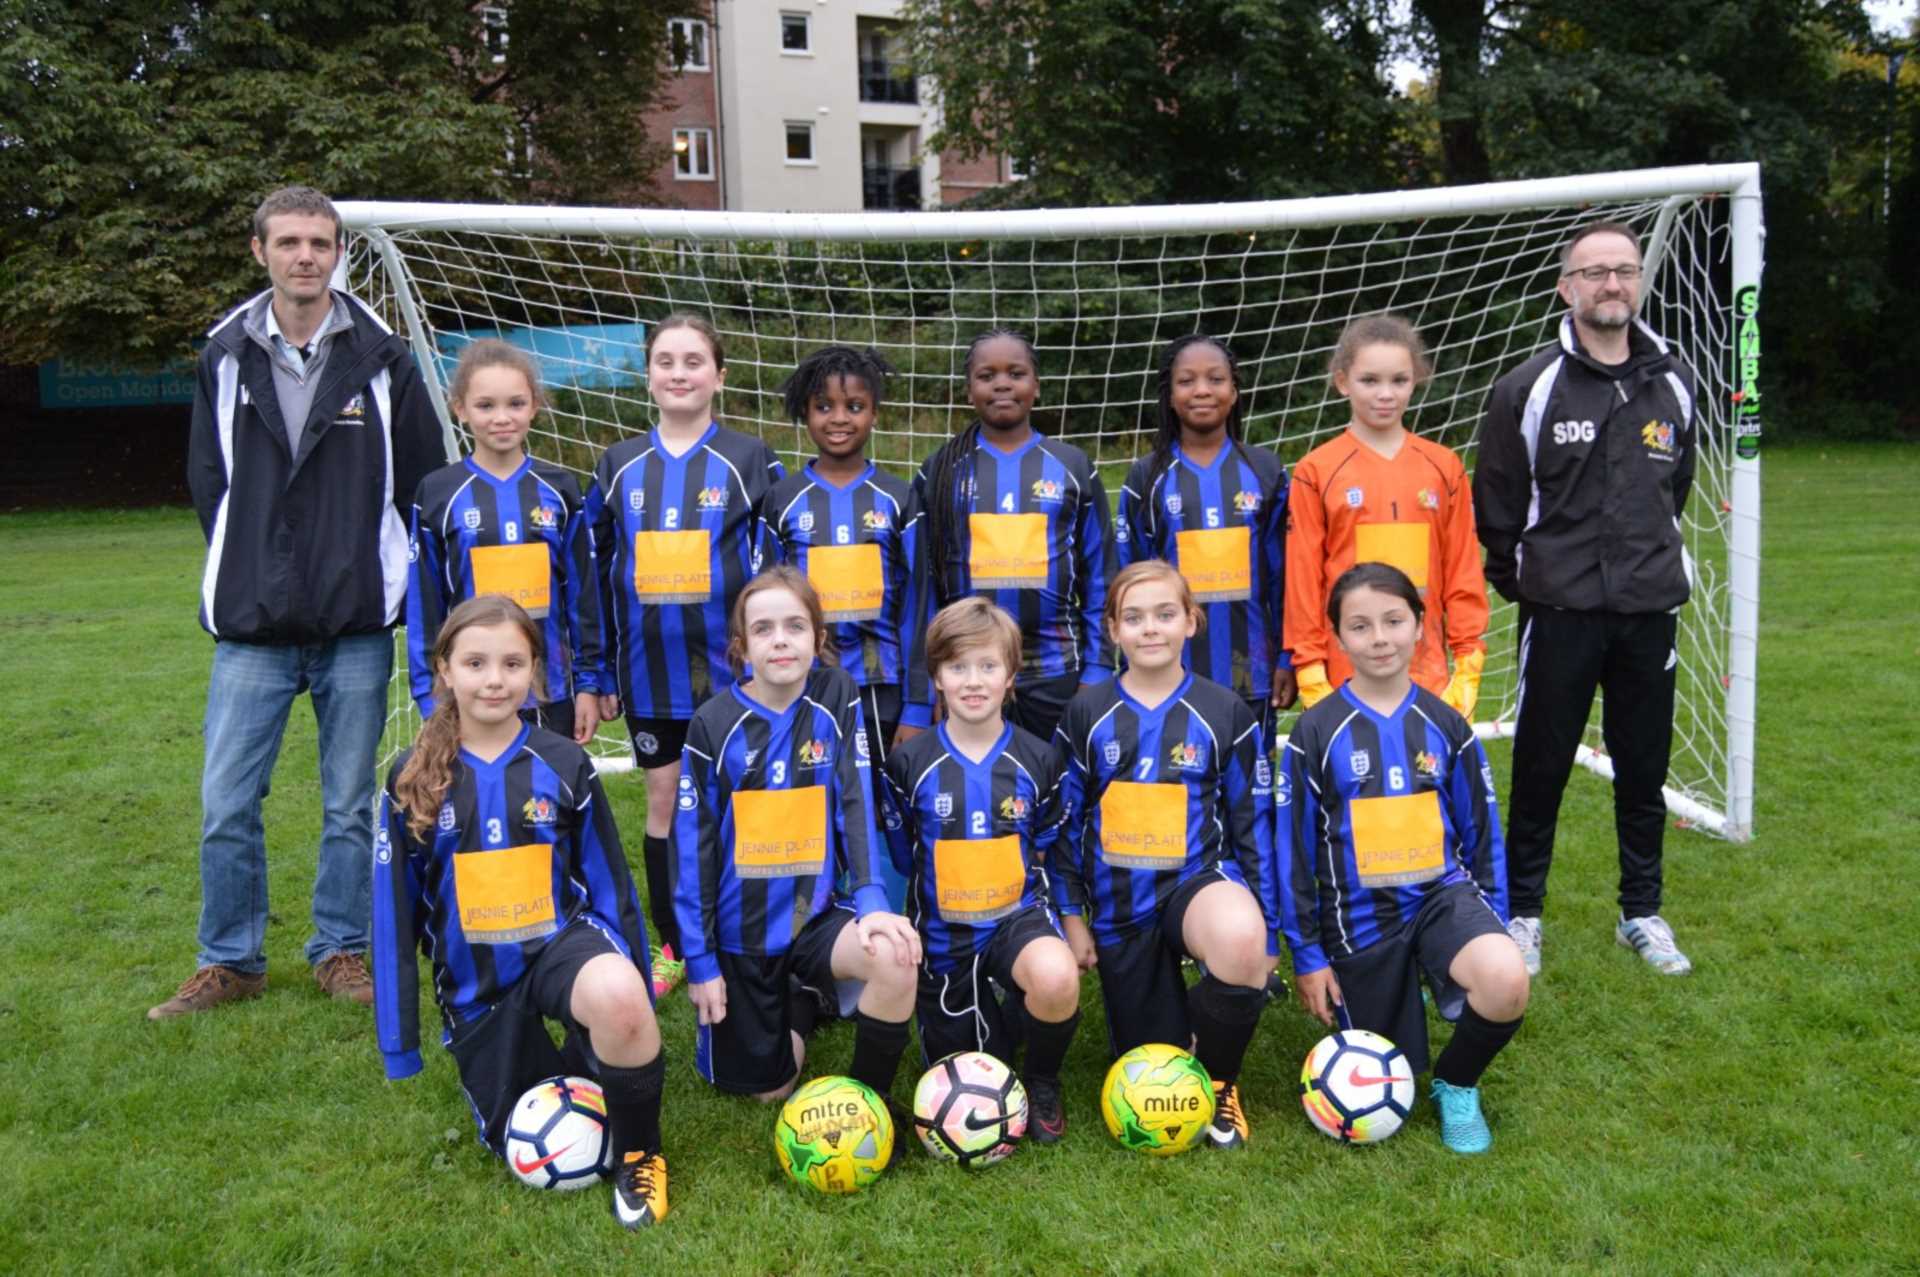 PRESTWICH MARAUDERS SAPPHIRES TO SHINE IN SEASON WITH NEW SPONSOR